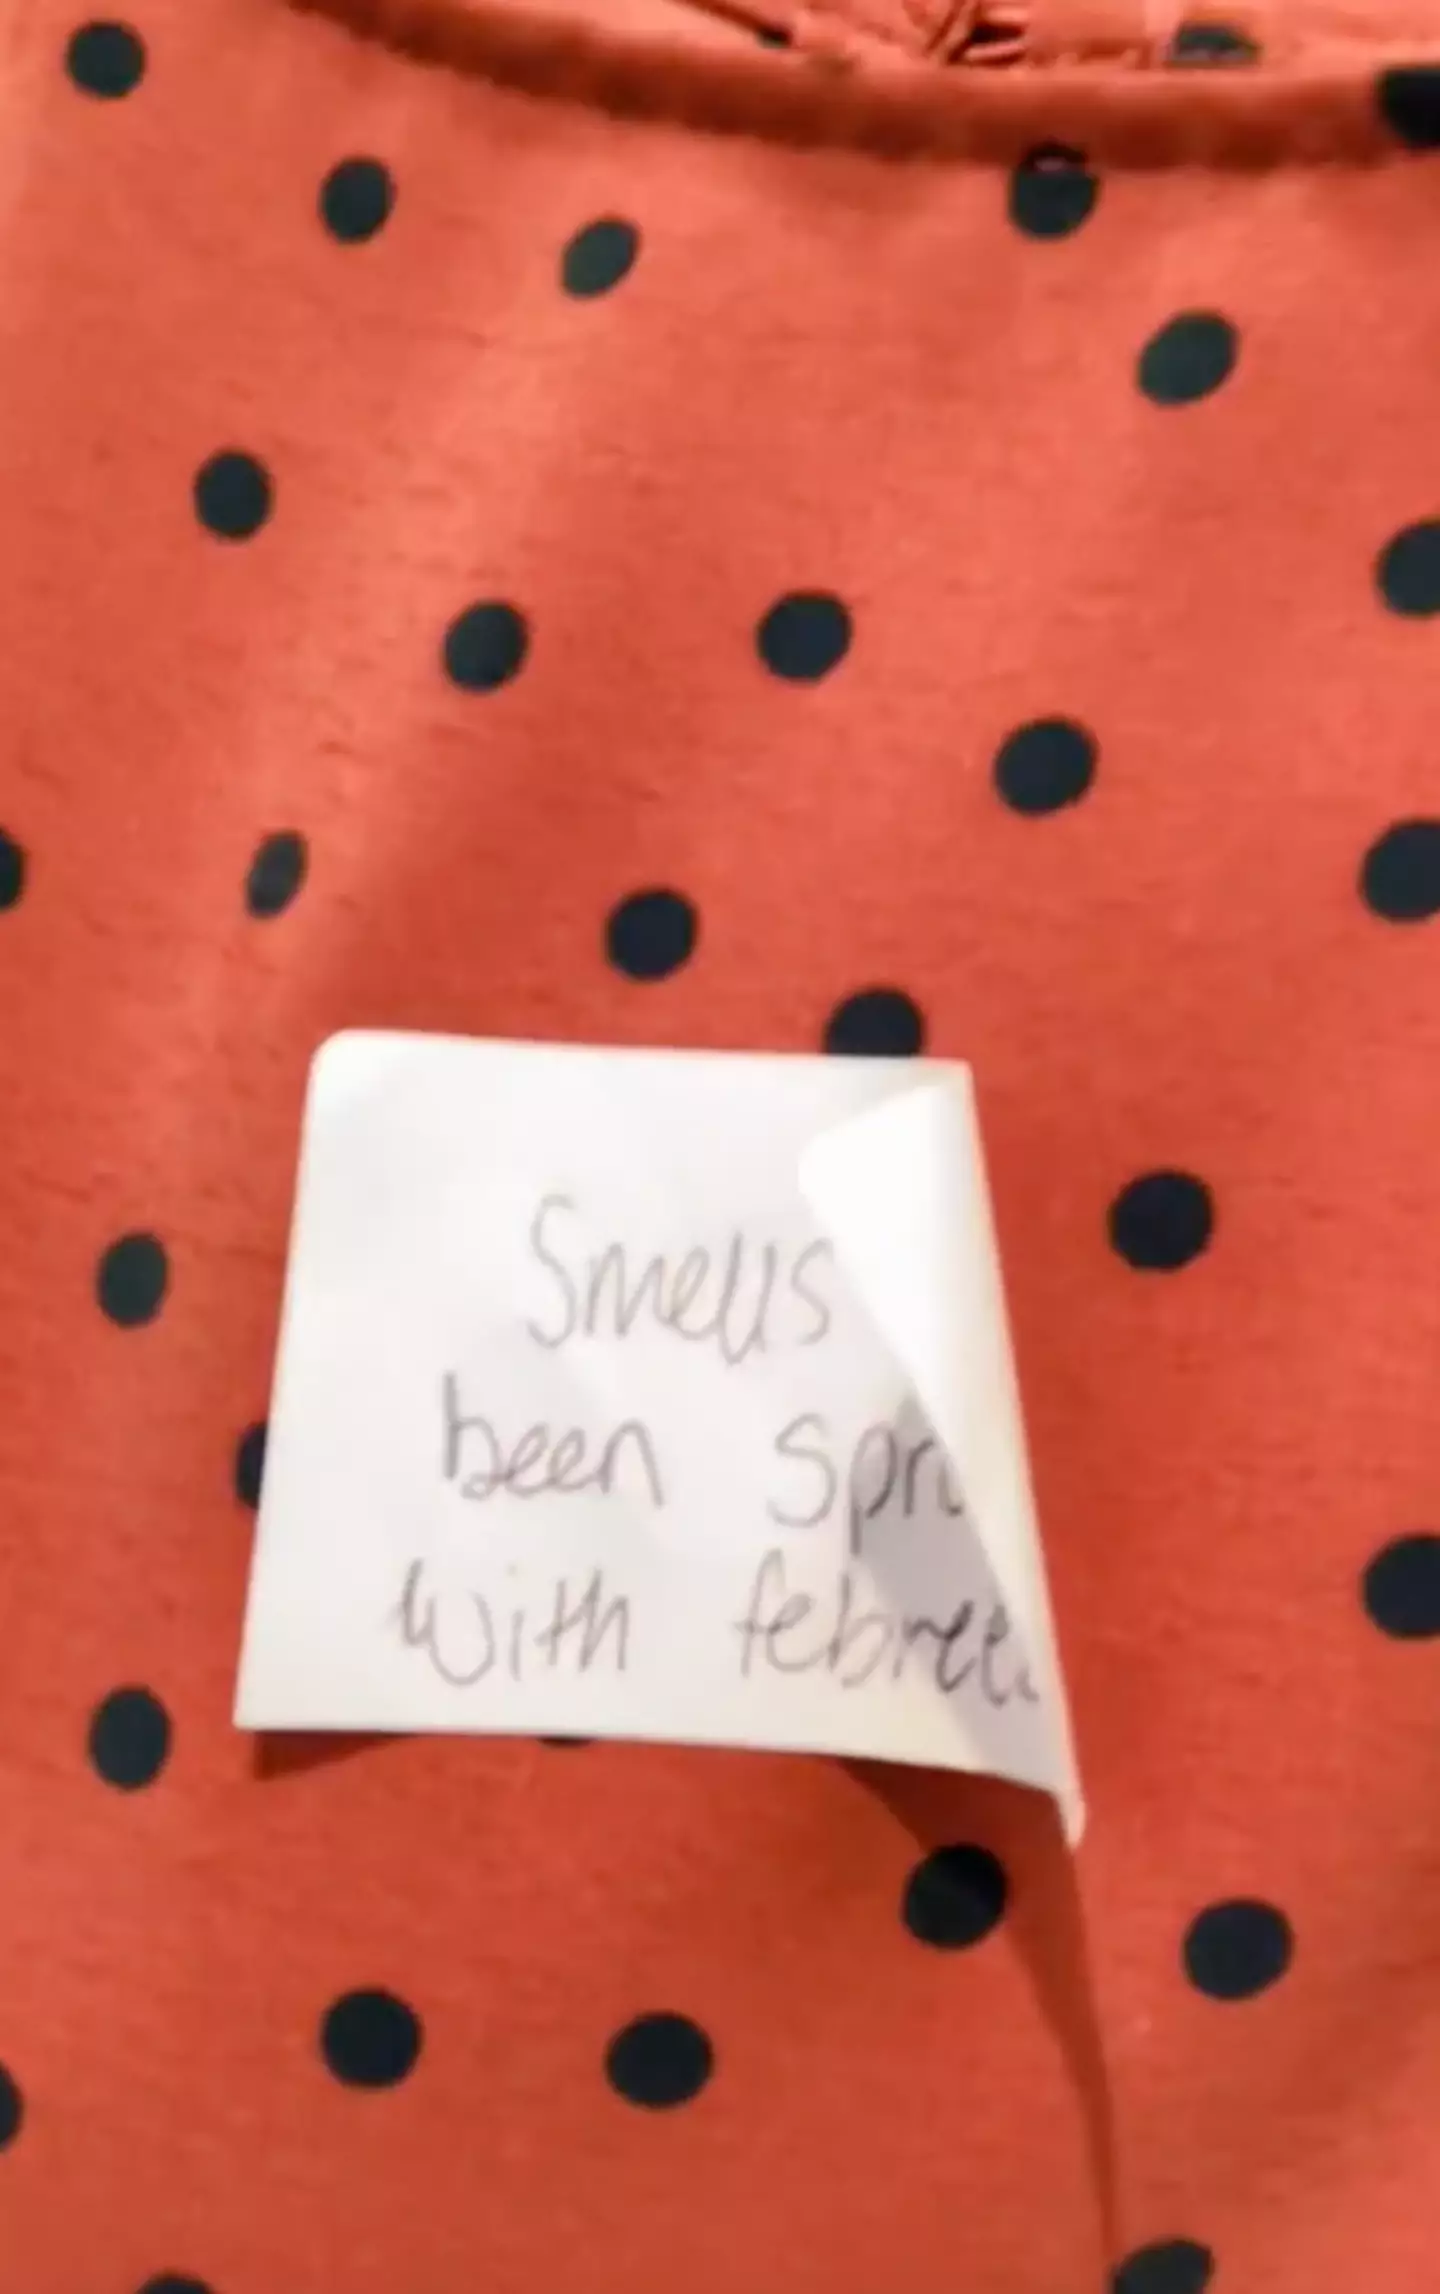 The dress had a note to say it smelt of Febreze (